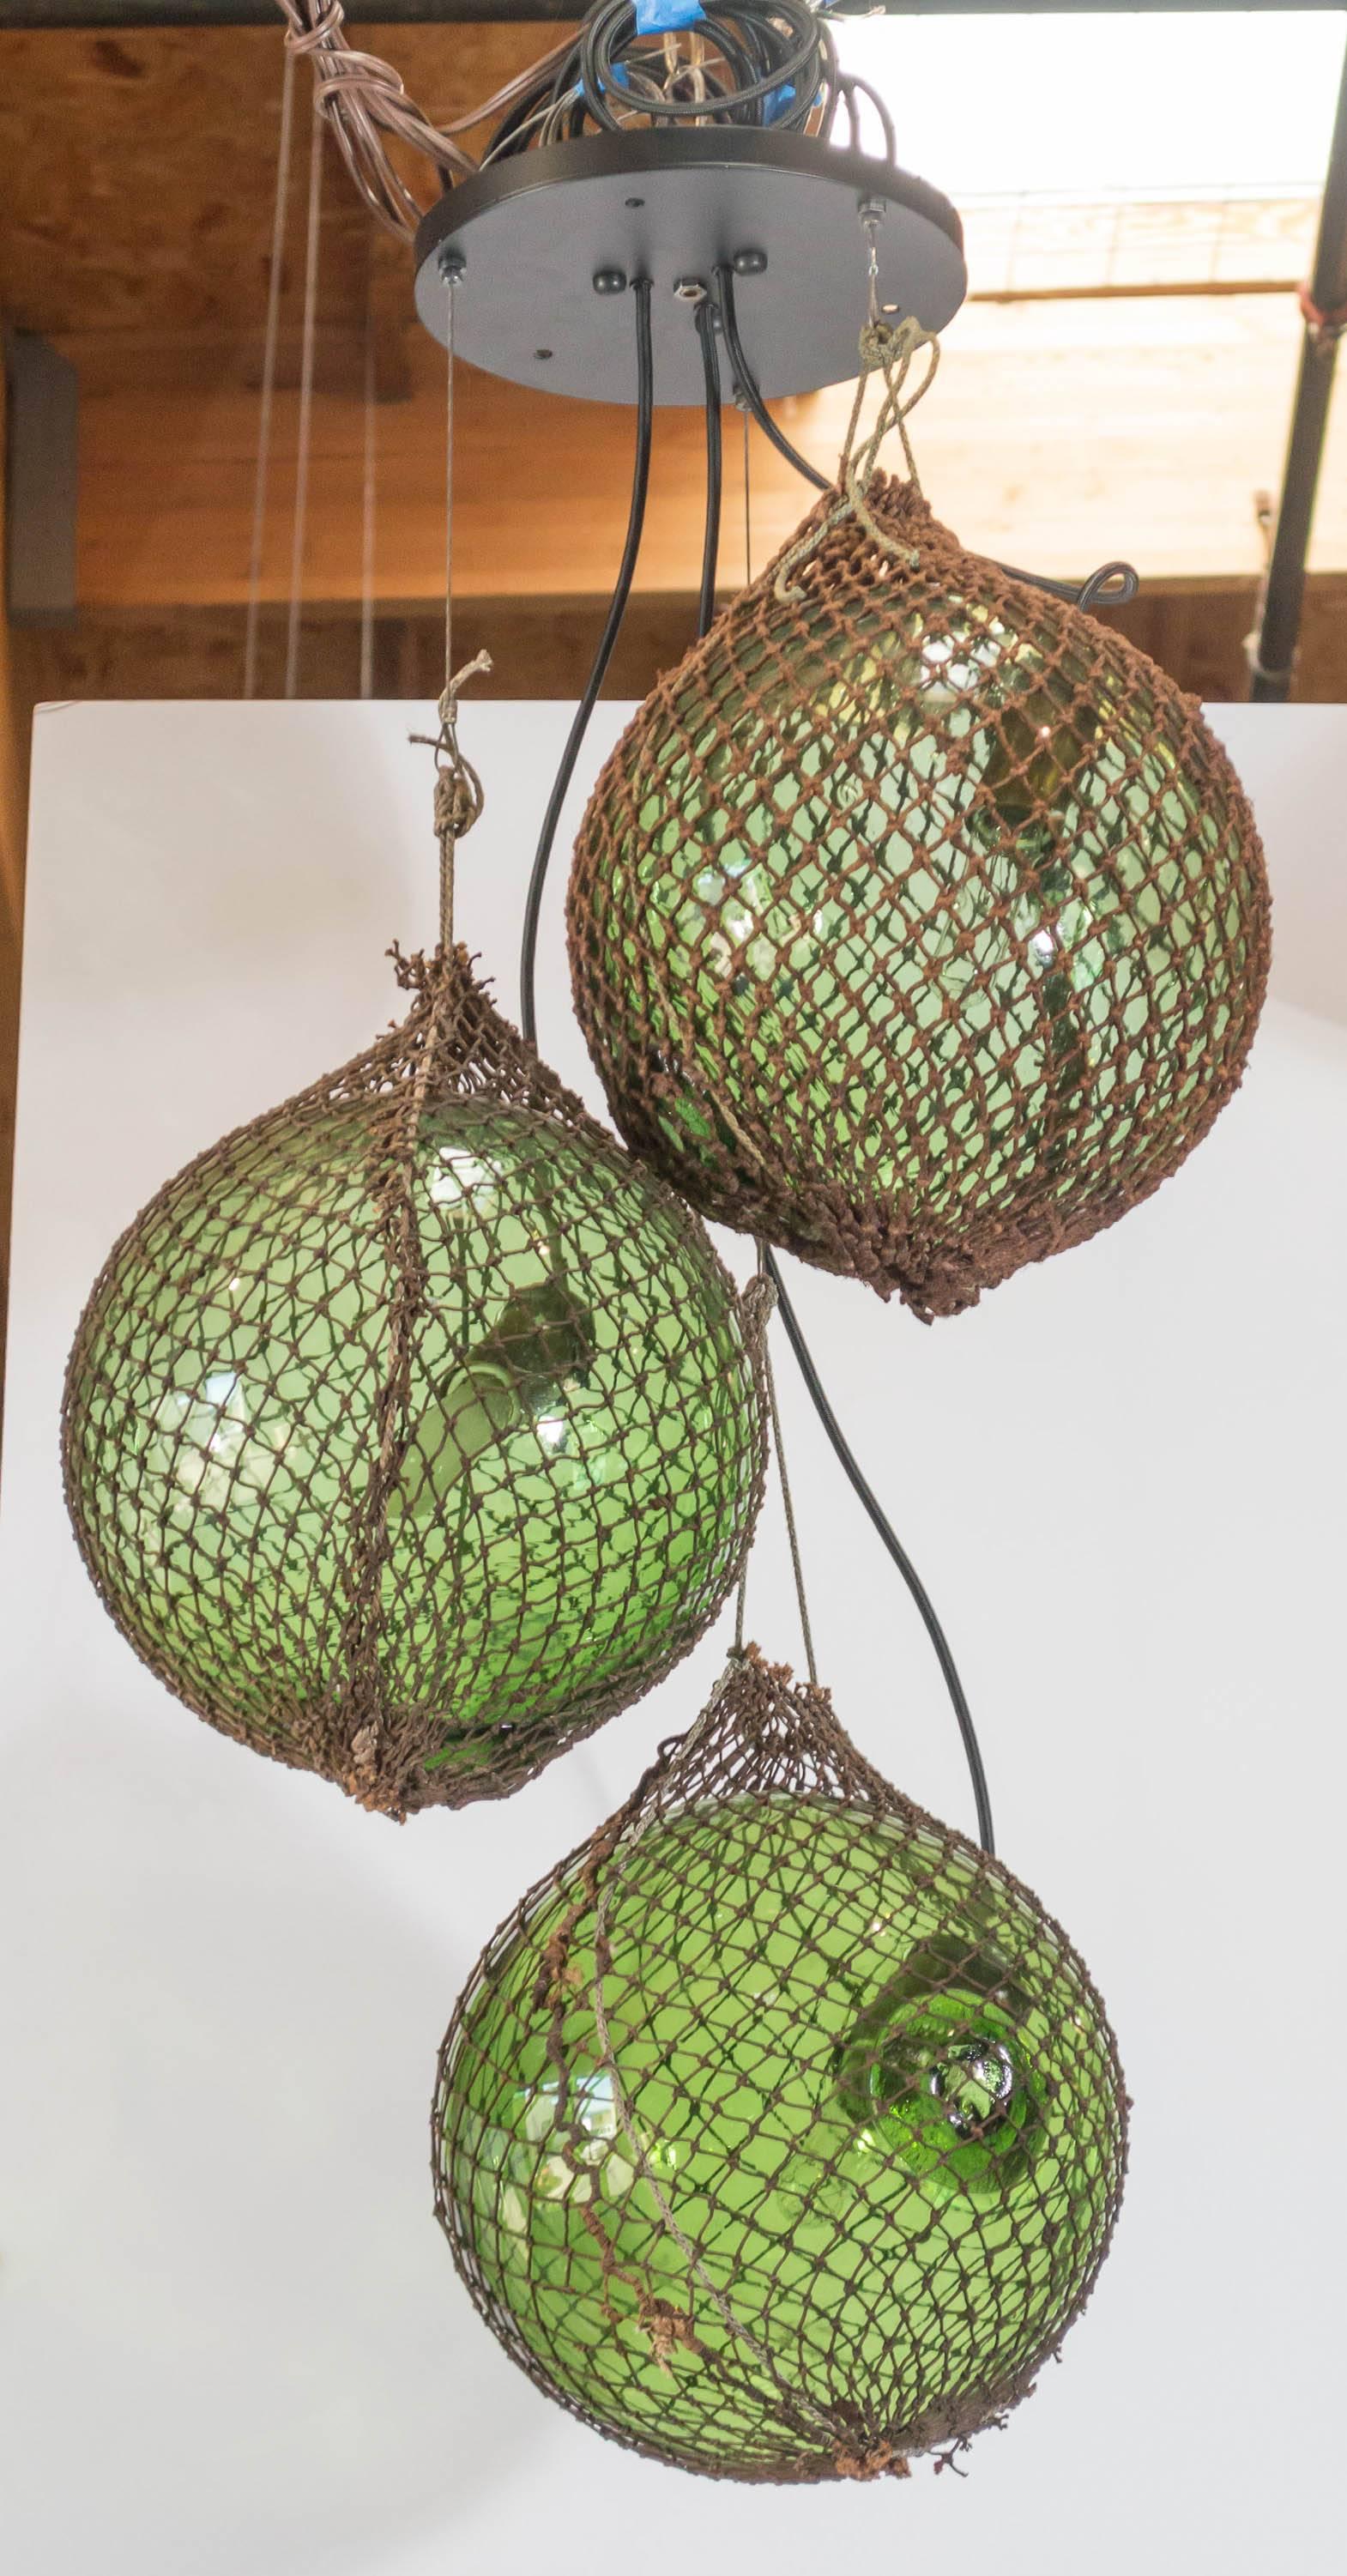 A pendant light made from three, large, green glass, float spheres
from Japan, with the original netting used for fishing. Newly fashioned with steel cables and bronze finished ceiling plate.  Height can be adjusted to be longer.